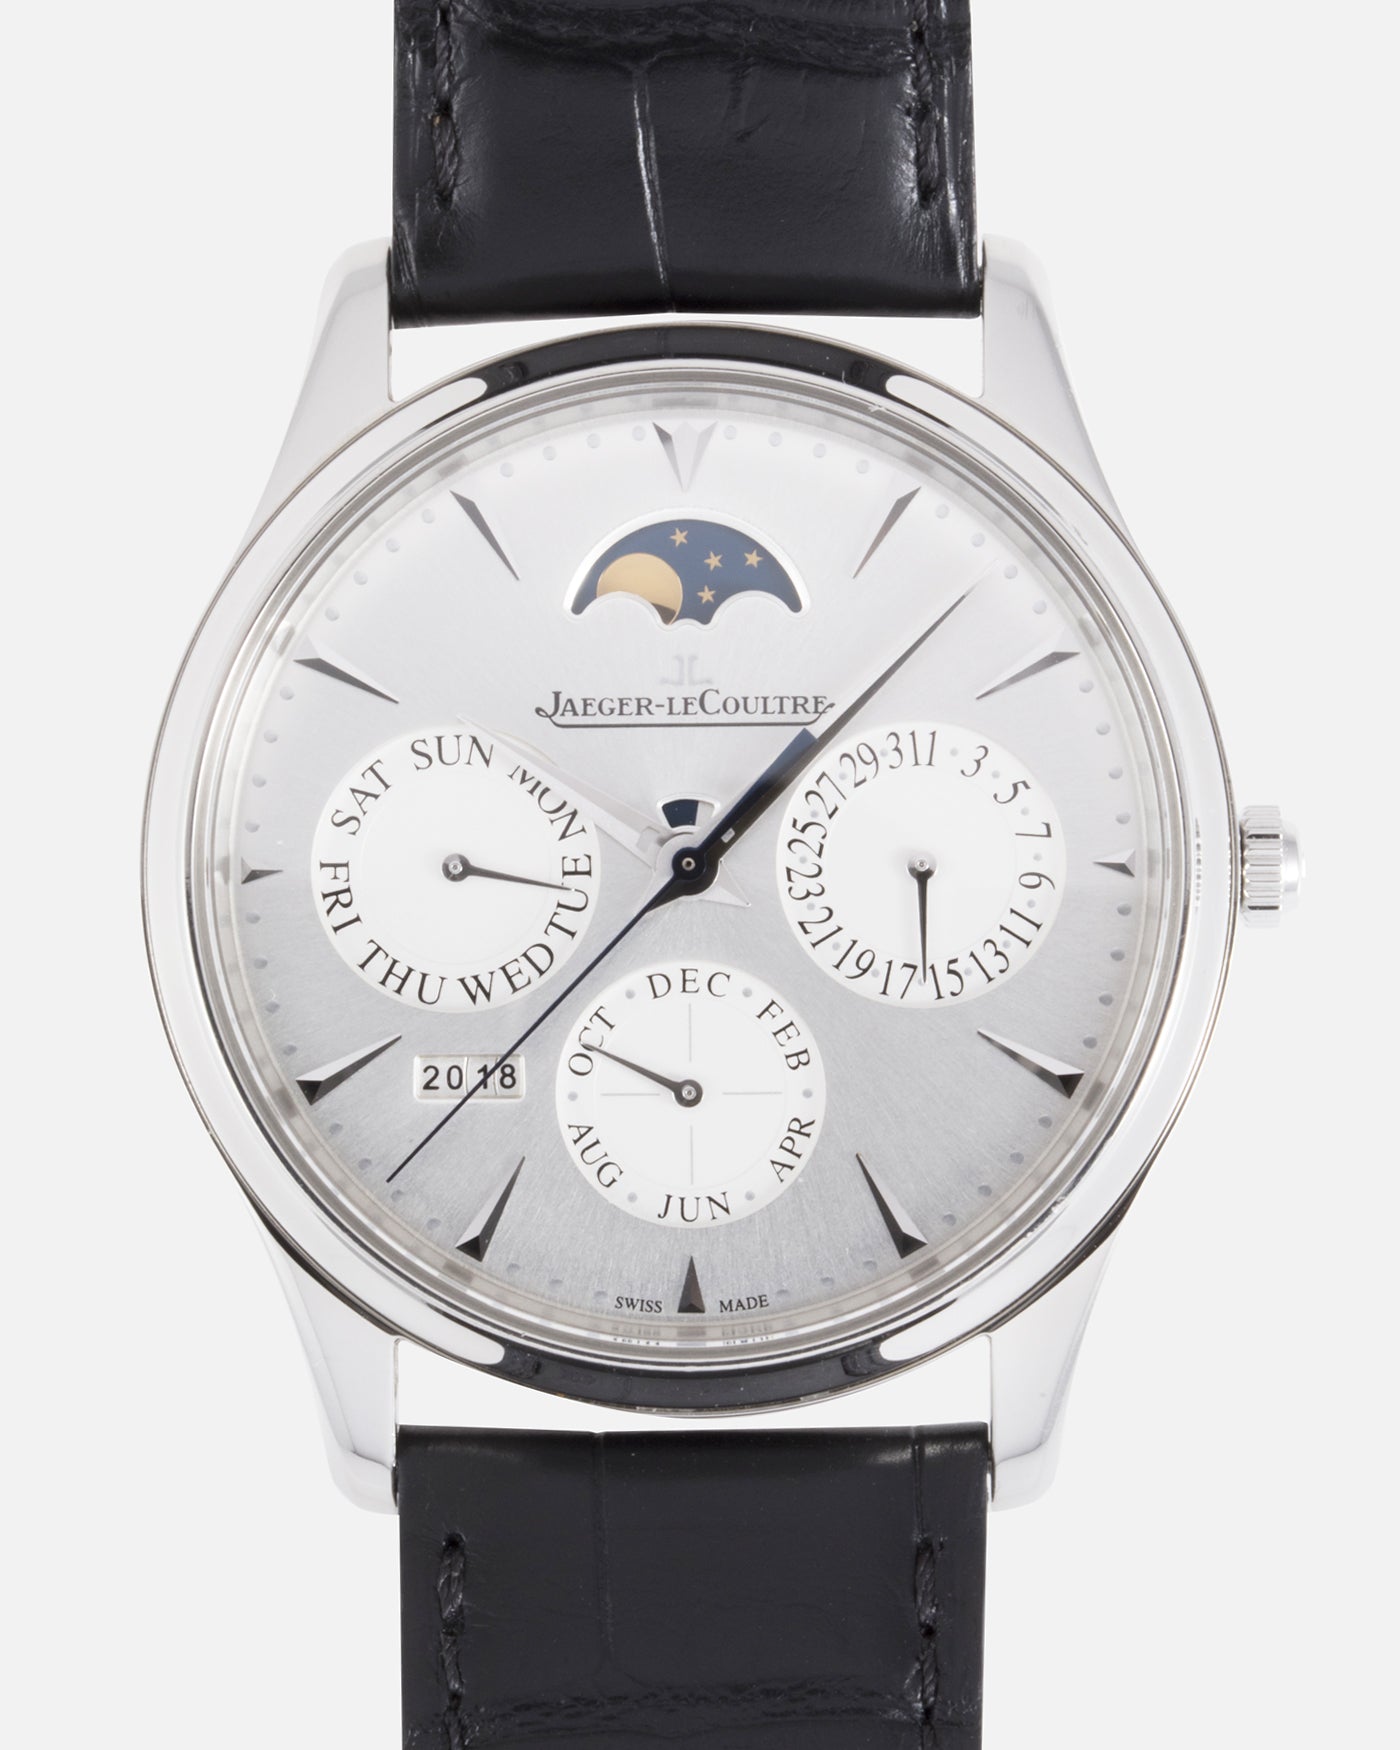 Jaeger LeCoultre Master Ultra Thin Perpetual Calendar Watch S Song